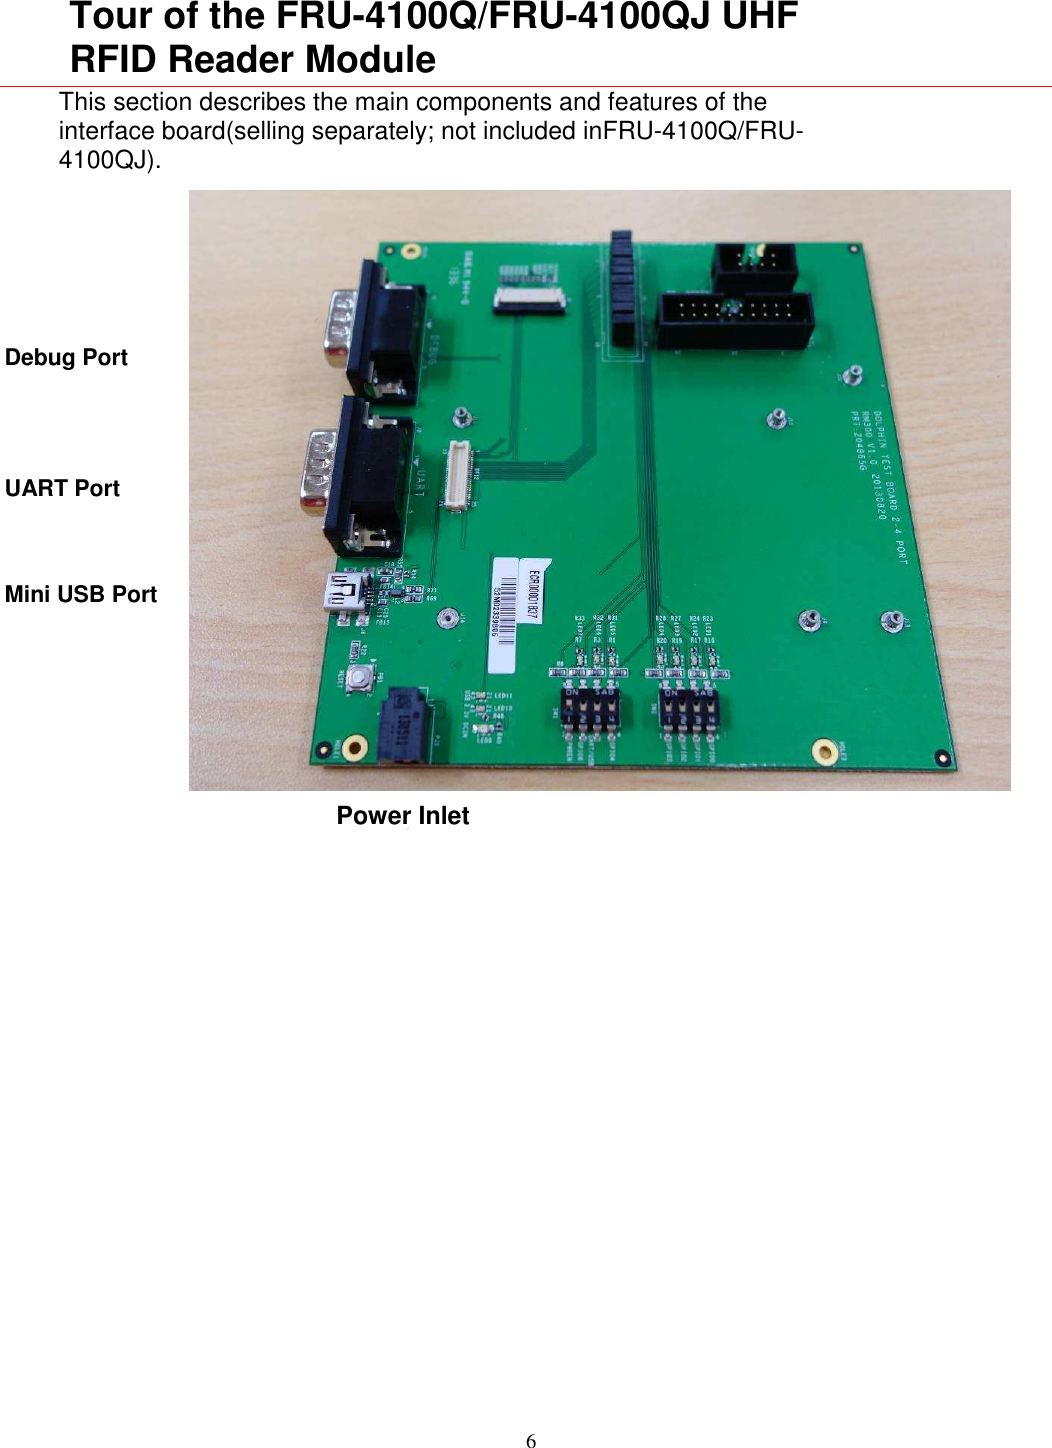 6   Tour of the FRU-4100Q/FRU-4100QJ UHF RFID Reader Module This section describes the main components and features of the interface board(selling separately; not included inFRU-4100Q/FRU-4100QJ).        Debug Port     UART Port    Mini USB Port        Power Inlet 